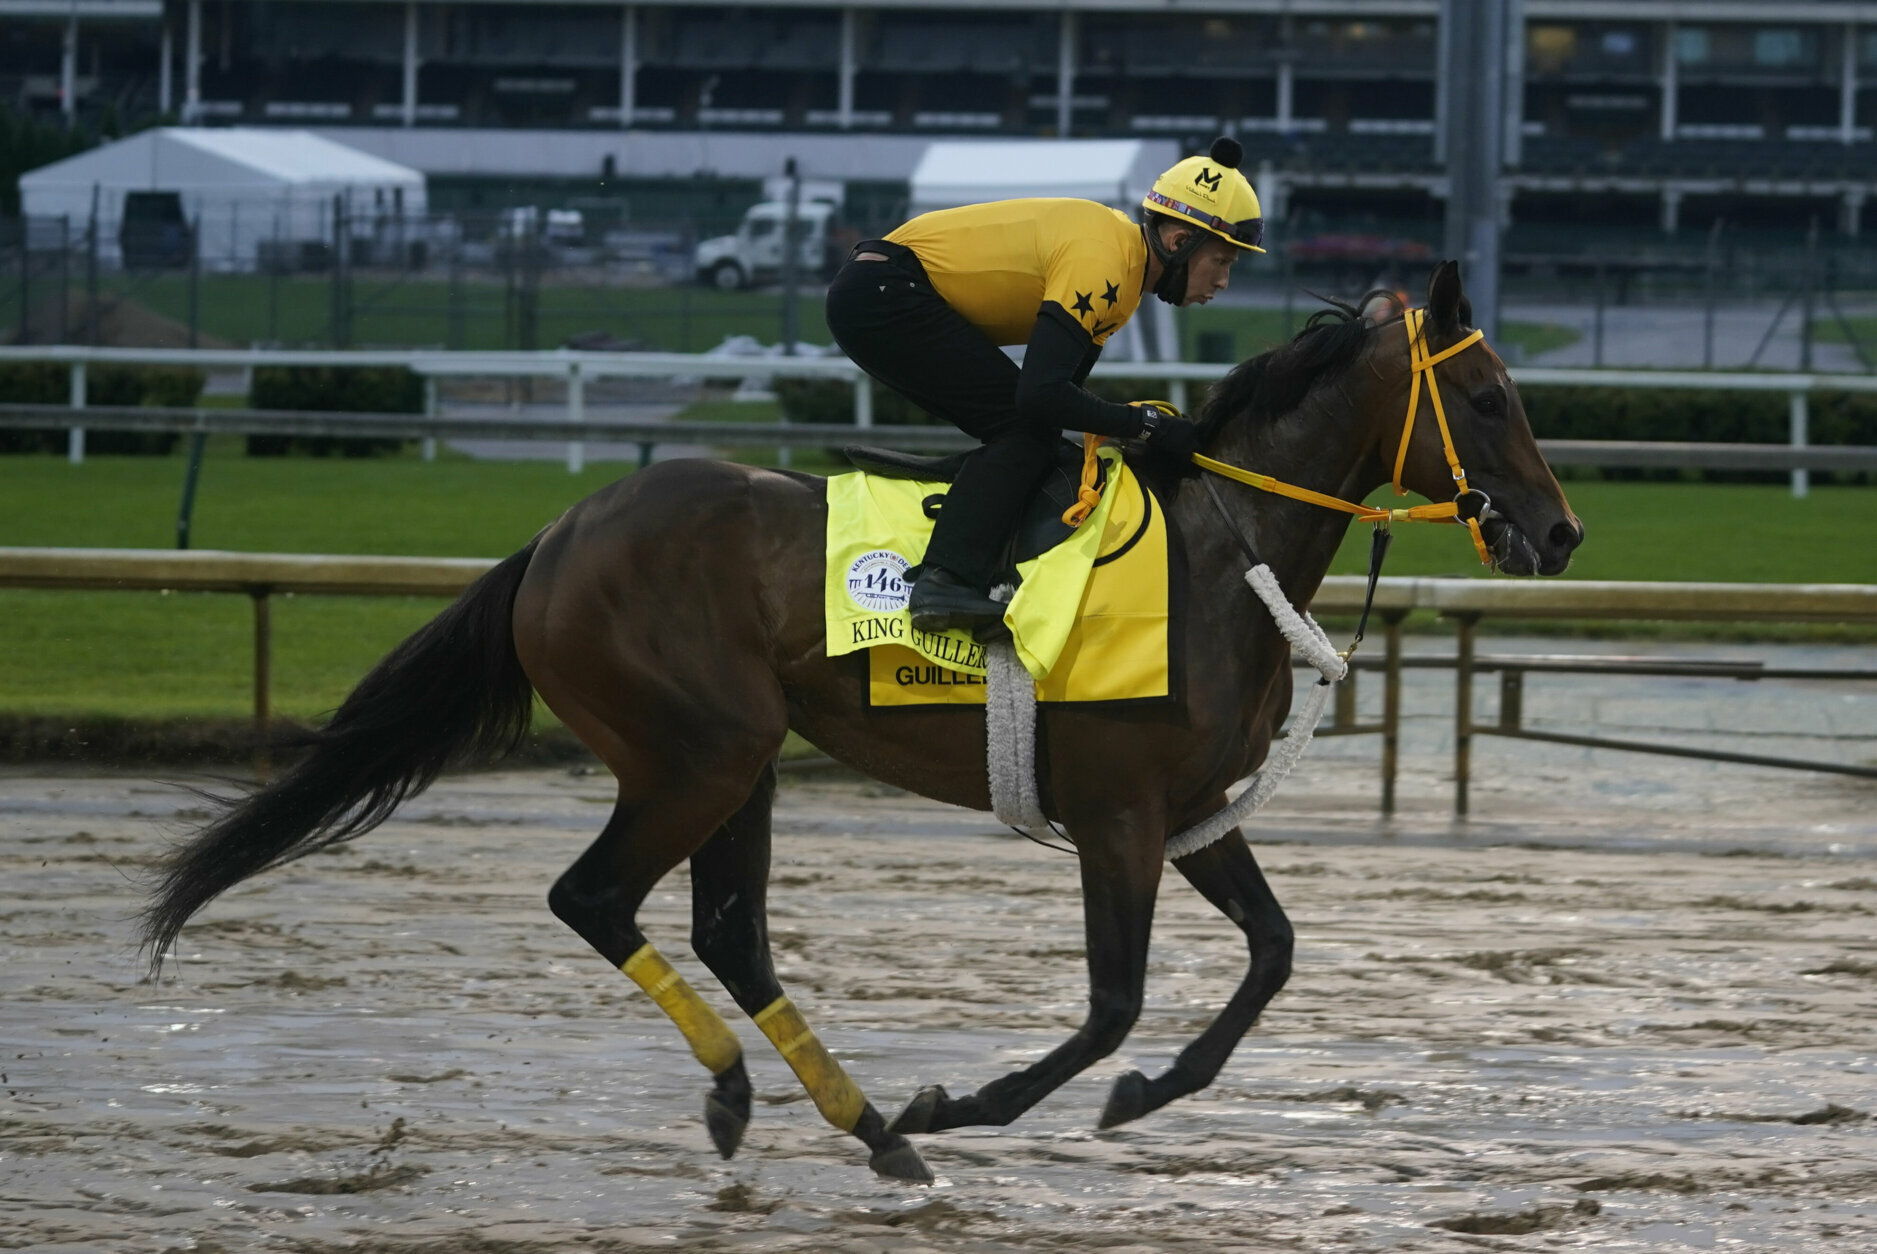 Kentucky Derby entry King Guillermo runs during a workout at Churchill Downs, Wednesday, Sept. 2, 2020, in Louisville, Ky. The 146th running of the Kentucky Derby is scheduled for Saturday, Sept. 5. (AP Photo/Darron Cummings)